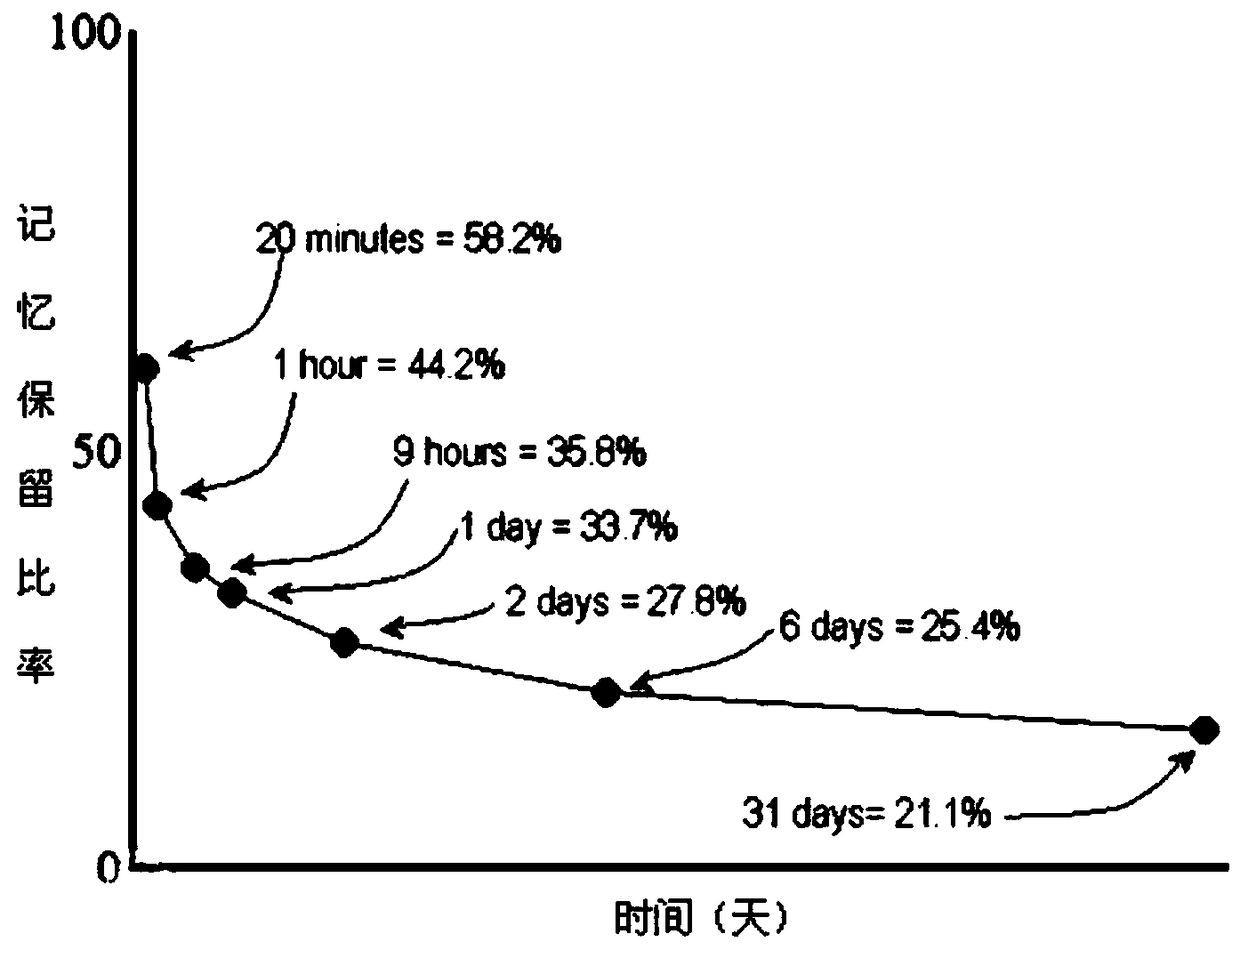 A book heat degree correlation detection method based on publishing time and forgetting curve